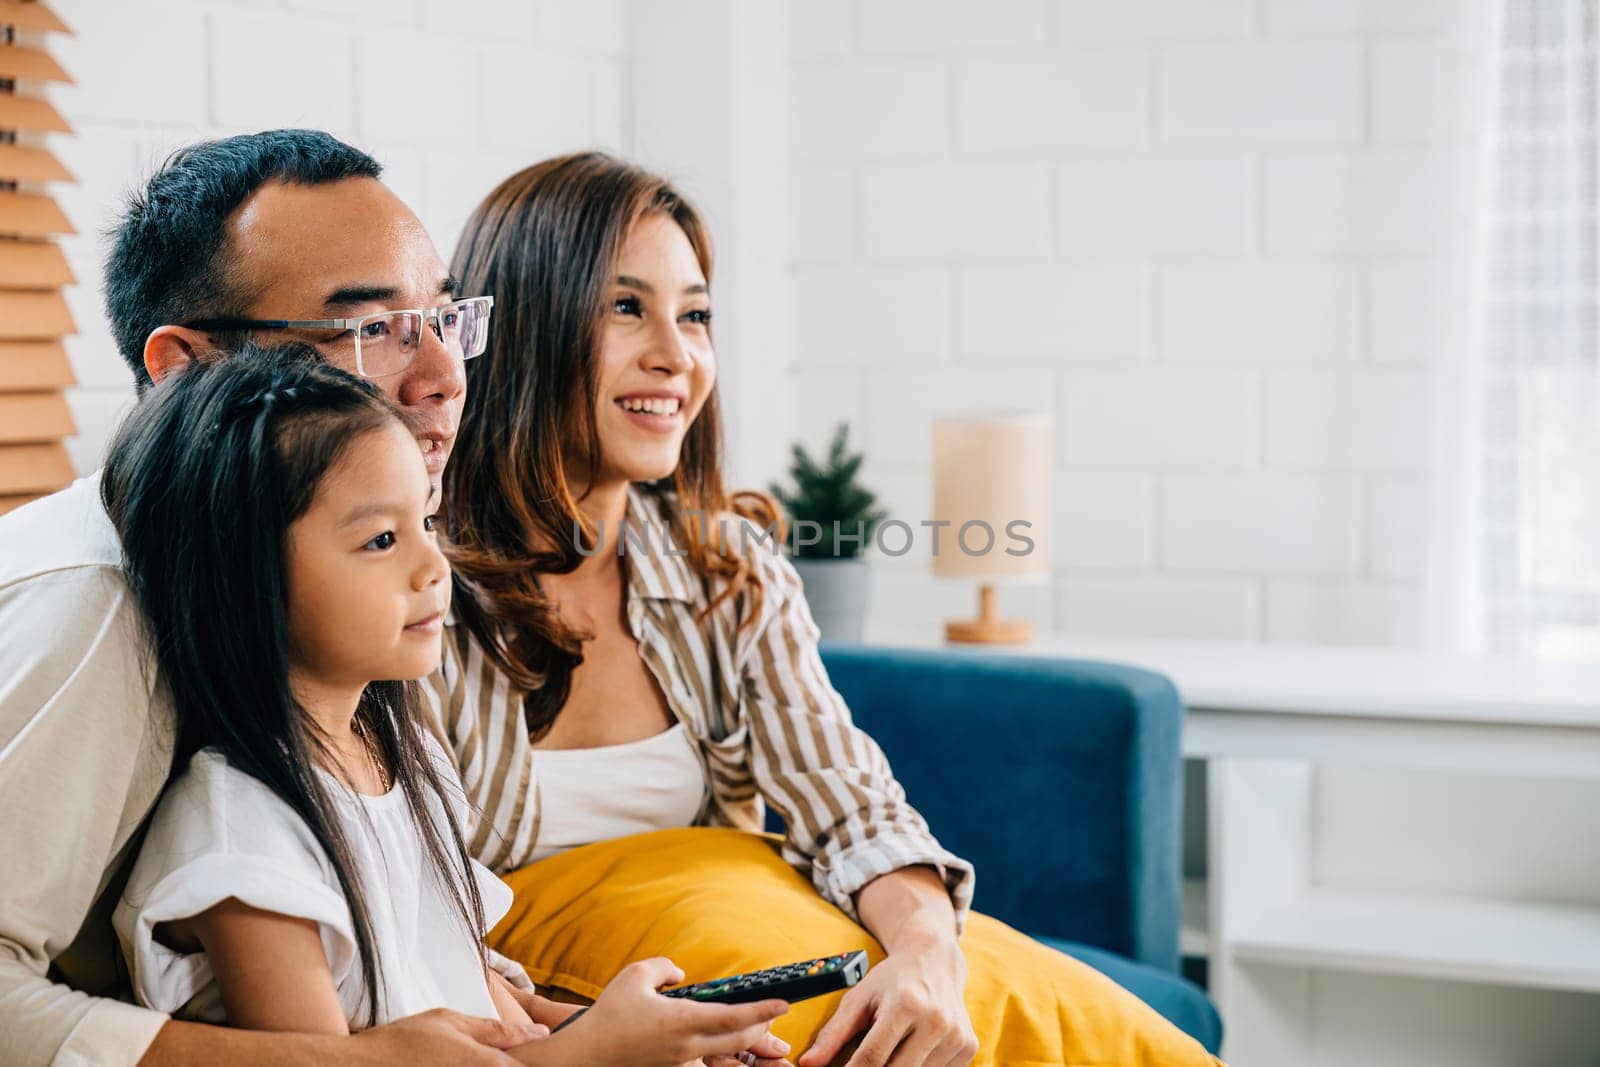 Asian family with kids finds relaxation and togetherness watching TV on sofa in their grooved modern living room. father mother son and daughter create precious family moments filled with smiles